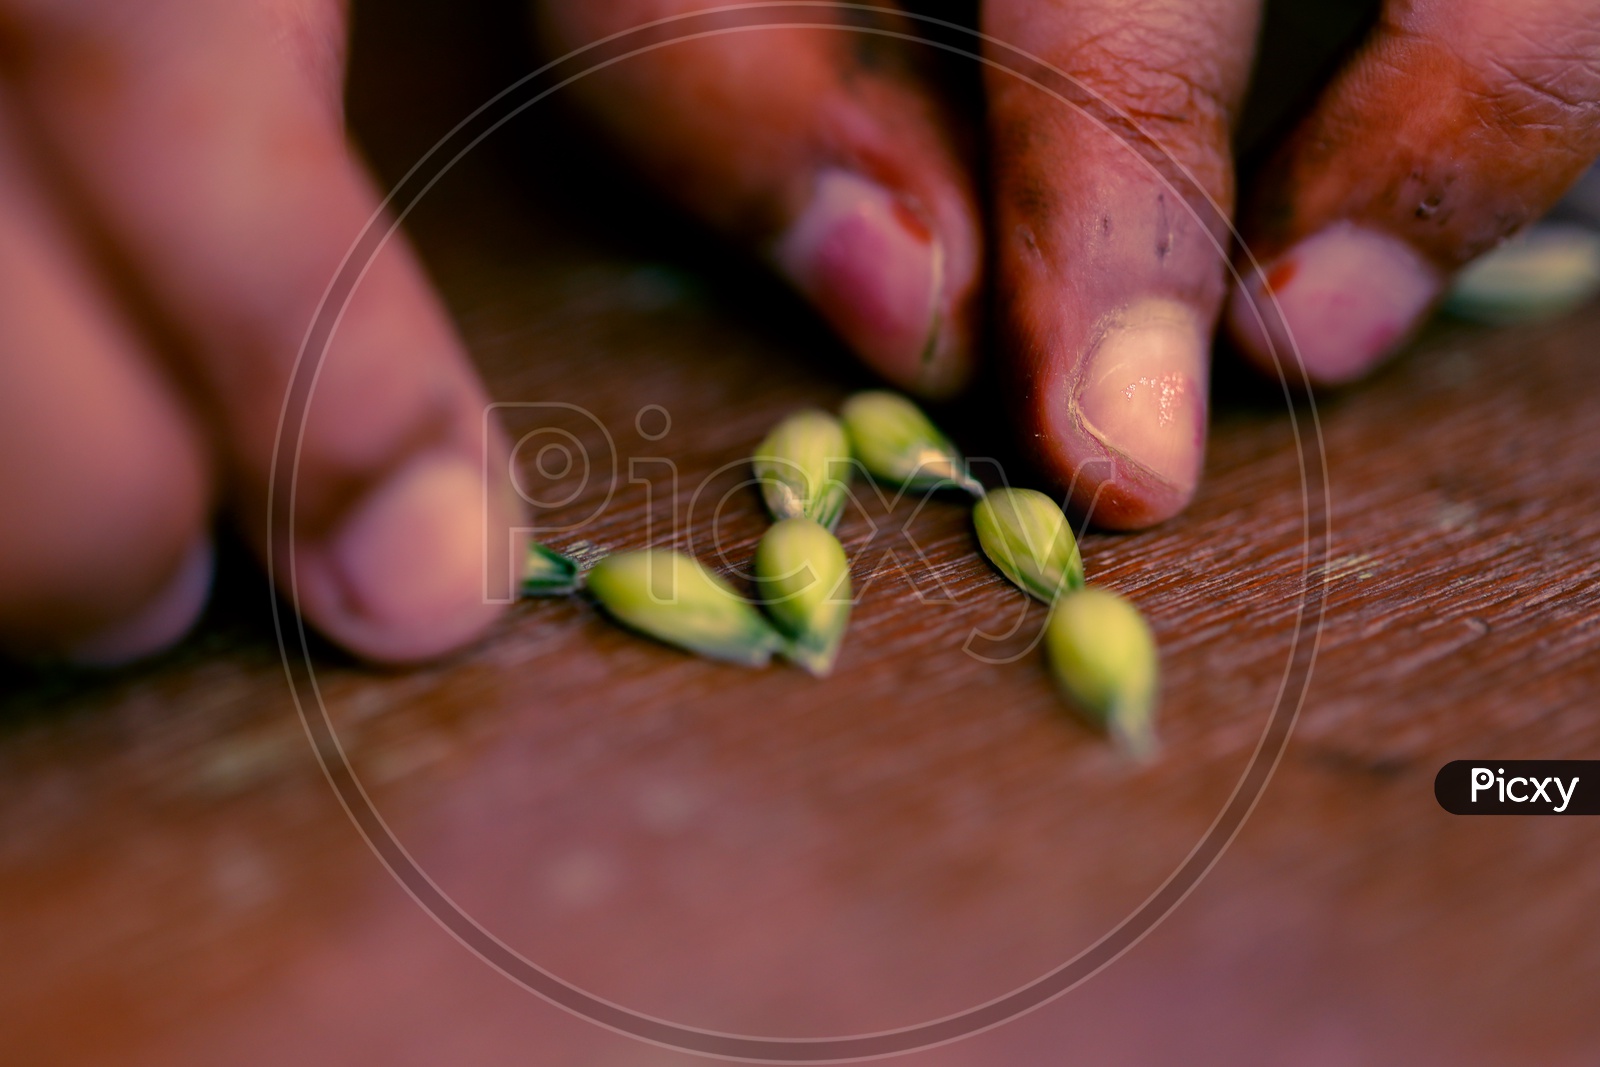 Fresh Green Wheat Grains From Wheat Eras Placed on a Wooden Table Closeup